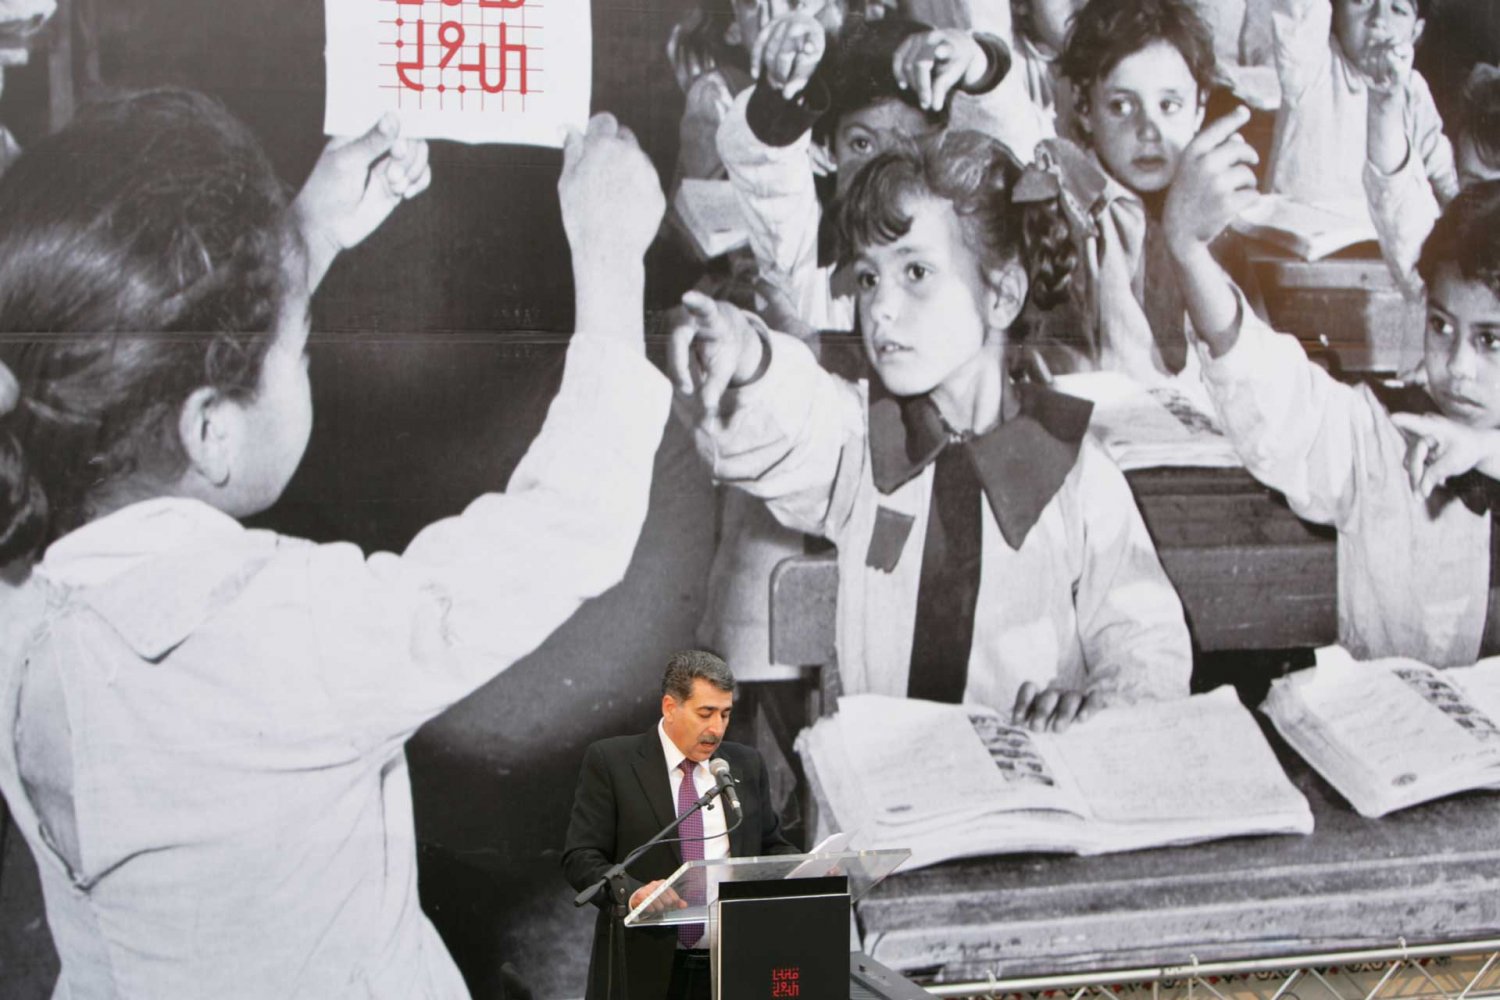 Ramallah Mayor Musa Hadid delivers the opening speech at Qalandiya International 2014 against a poster in the background designed by Jack Persekian